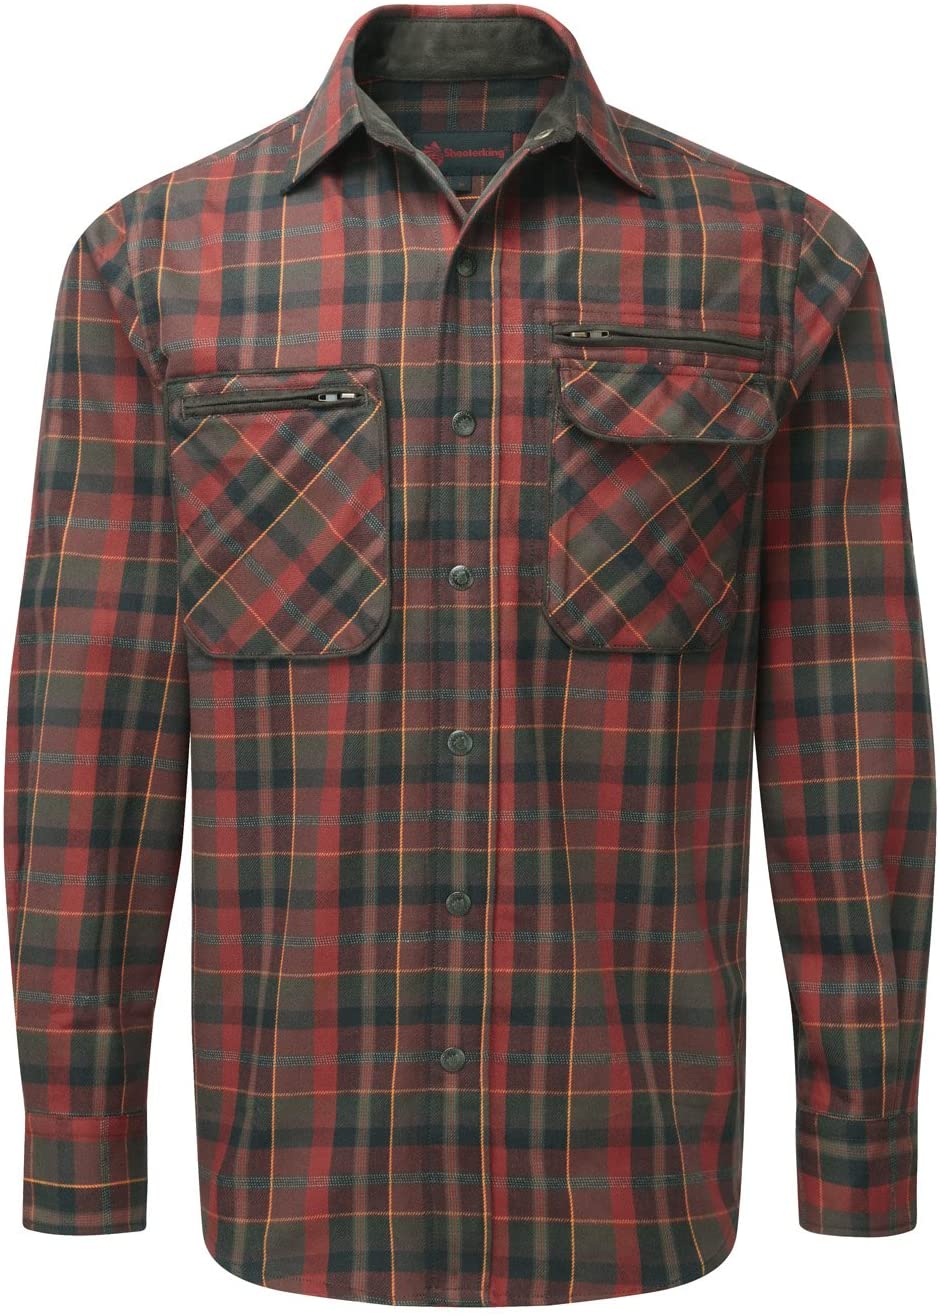 Greenland Shirt with Suede - Red